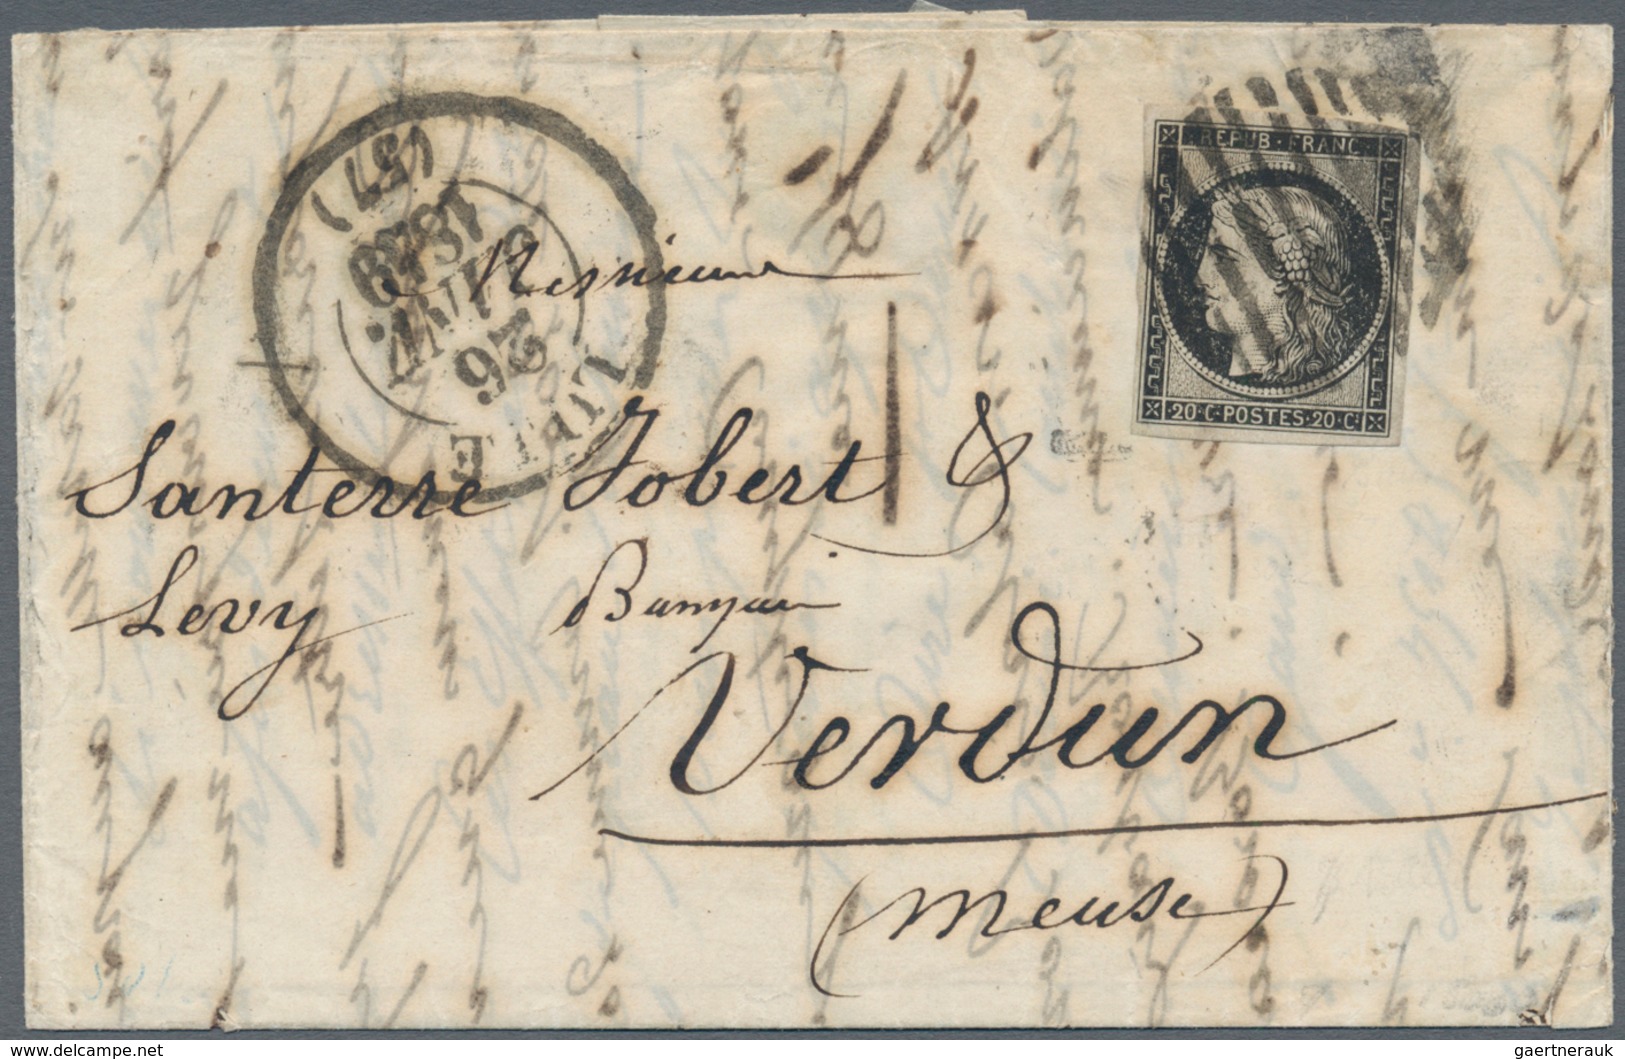 Frankreich: 1849, 20 C Black, Large Margins, Tied By The "BARS OF LILLE" Grid Cancel, Along With Lar - Ungebraucht